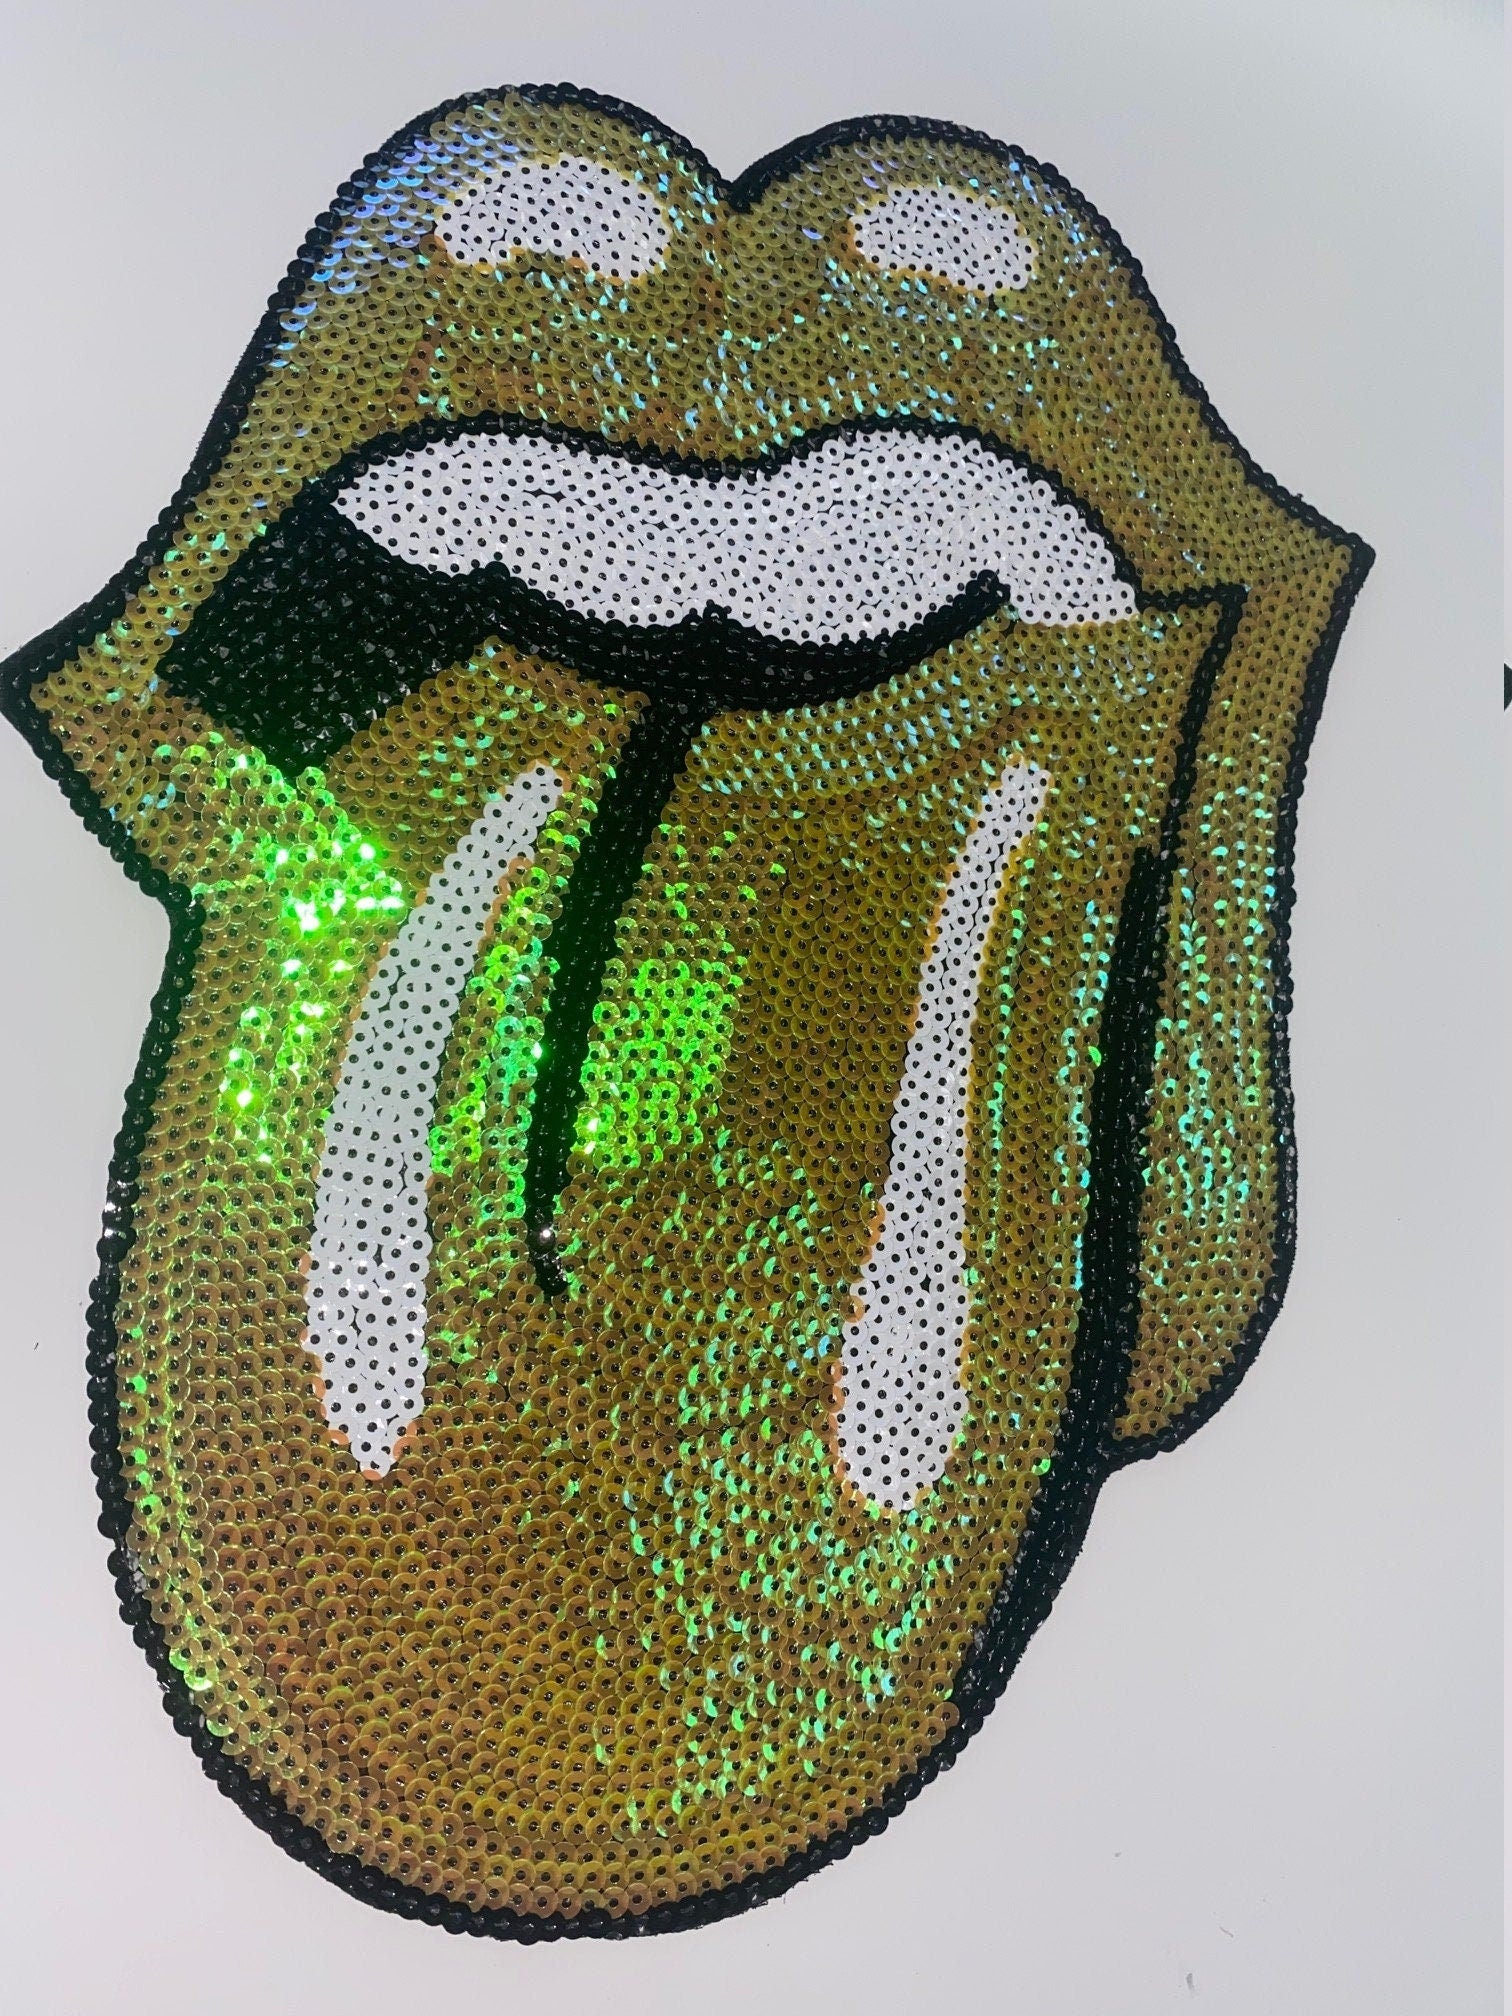 Sequins Yellow Iridescent KISS Lips and Tongue Patch (iron-on) Size 13", LARGE Bling Patch for Denim Jacket, Shirts, Hoodies, and More